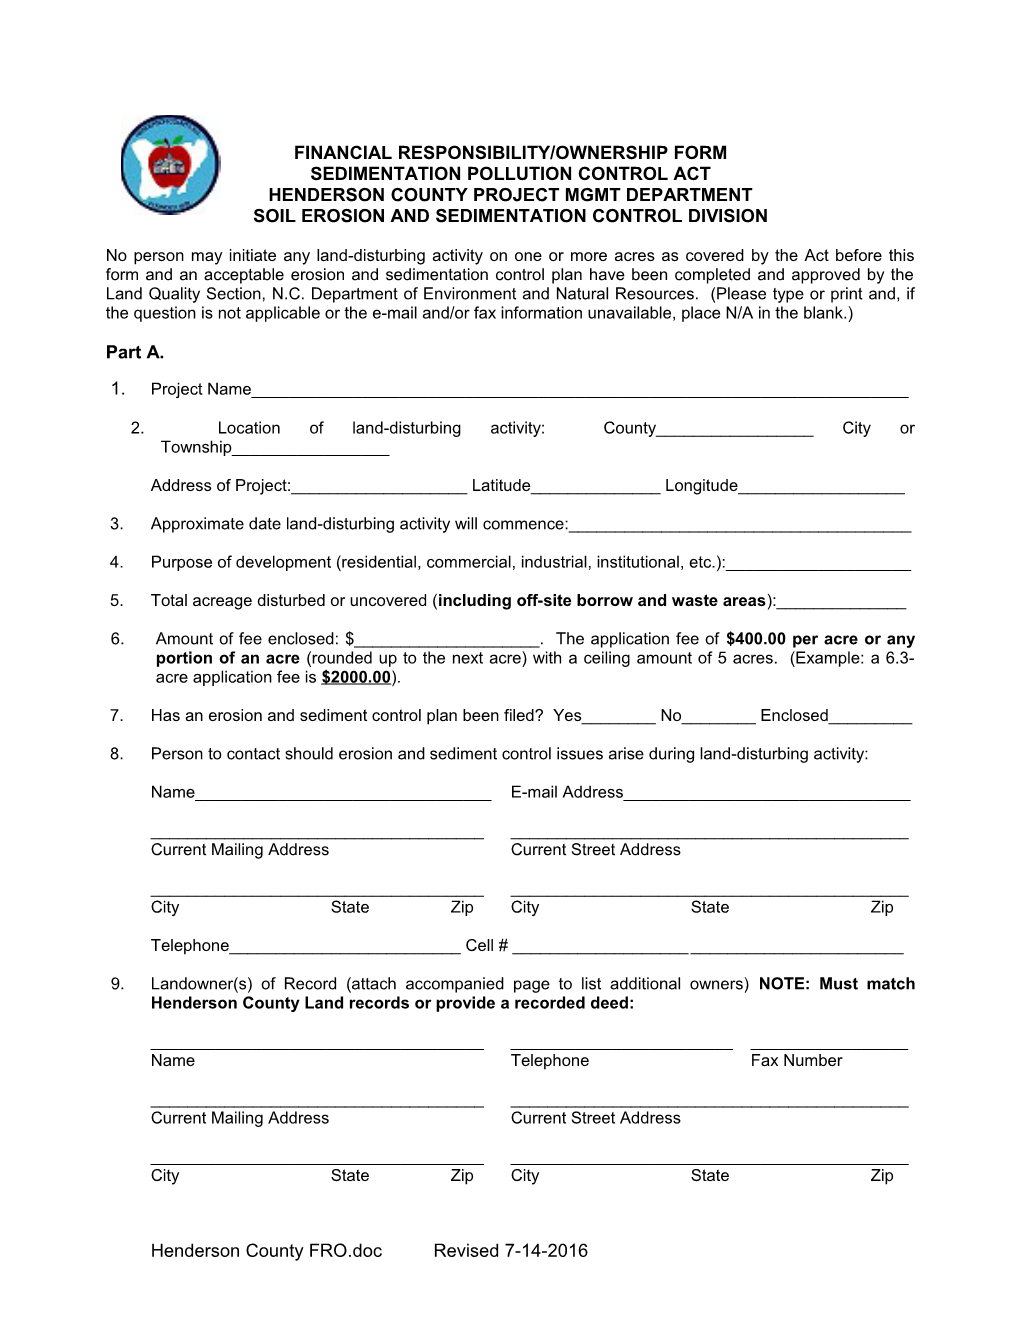 Financial Responsibility/Ownership Form